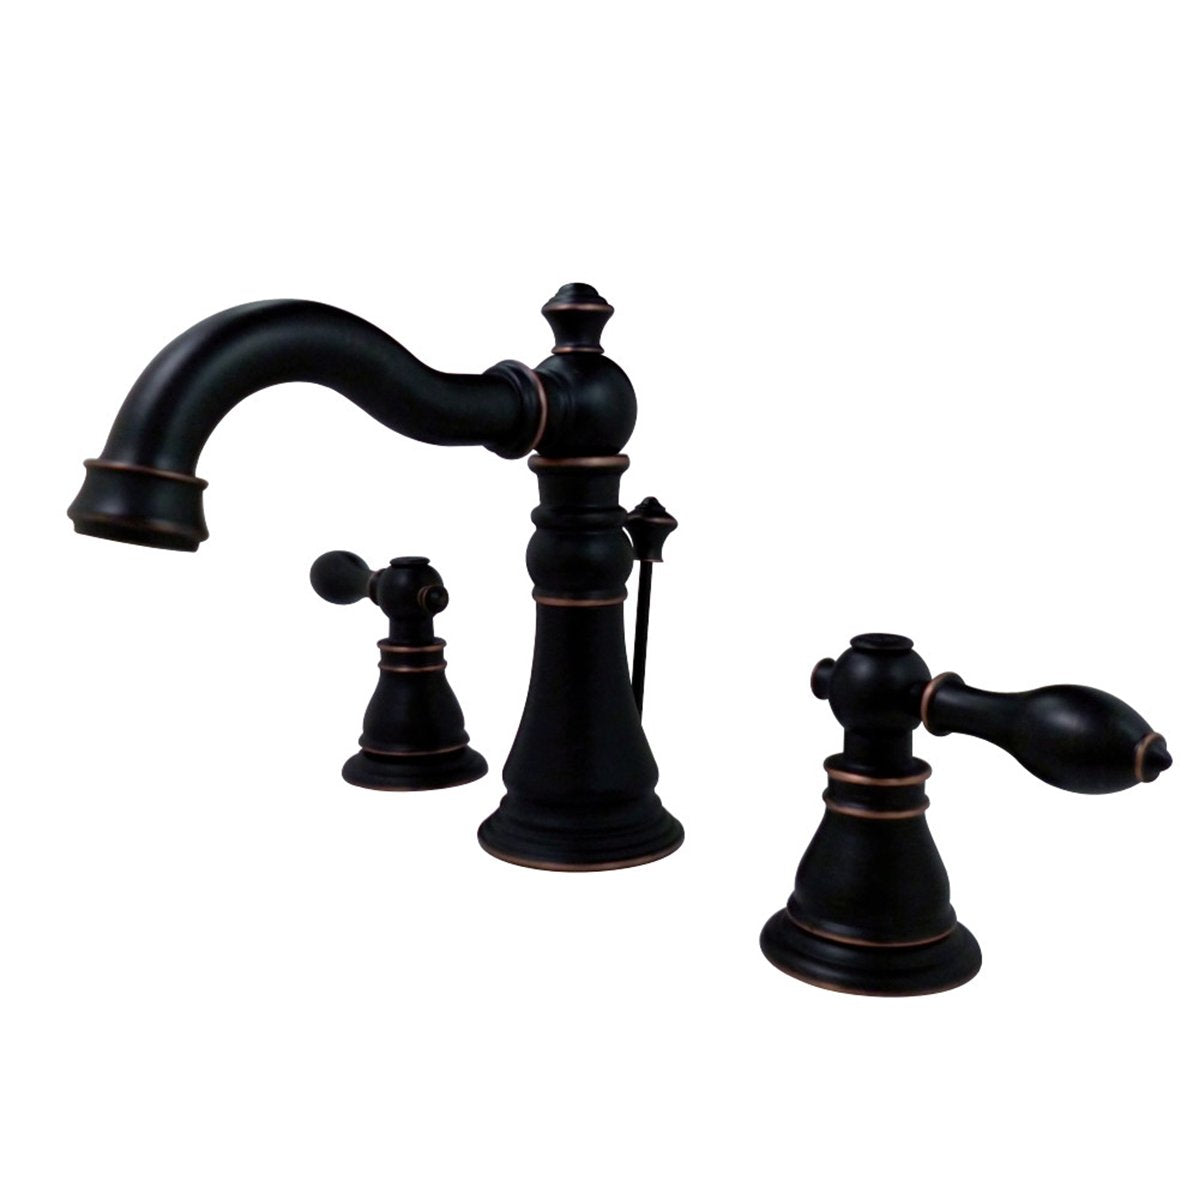 Kingston Brass Fauceture American Classic Widespread Bathroom Faucet